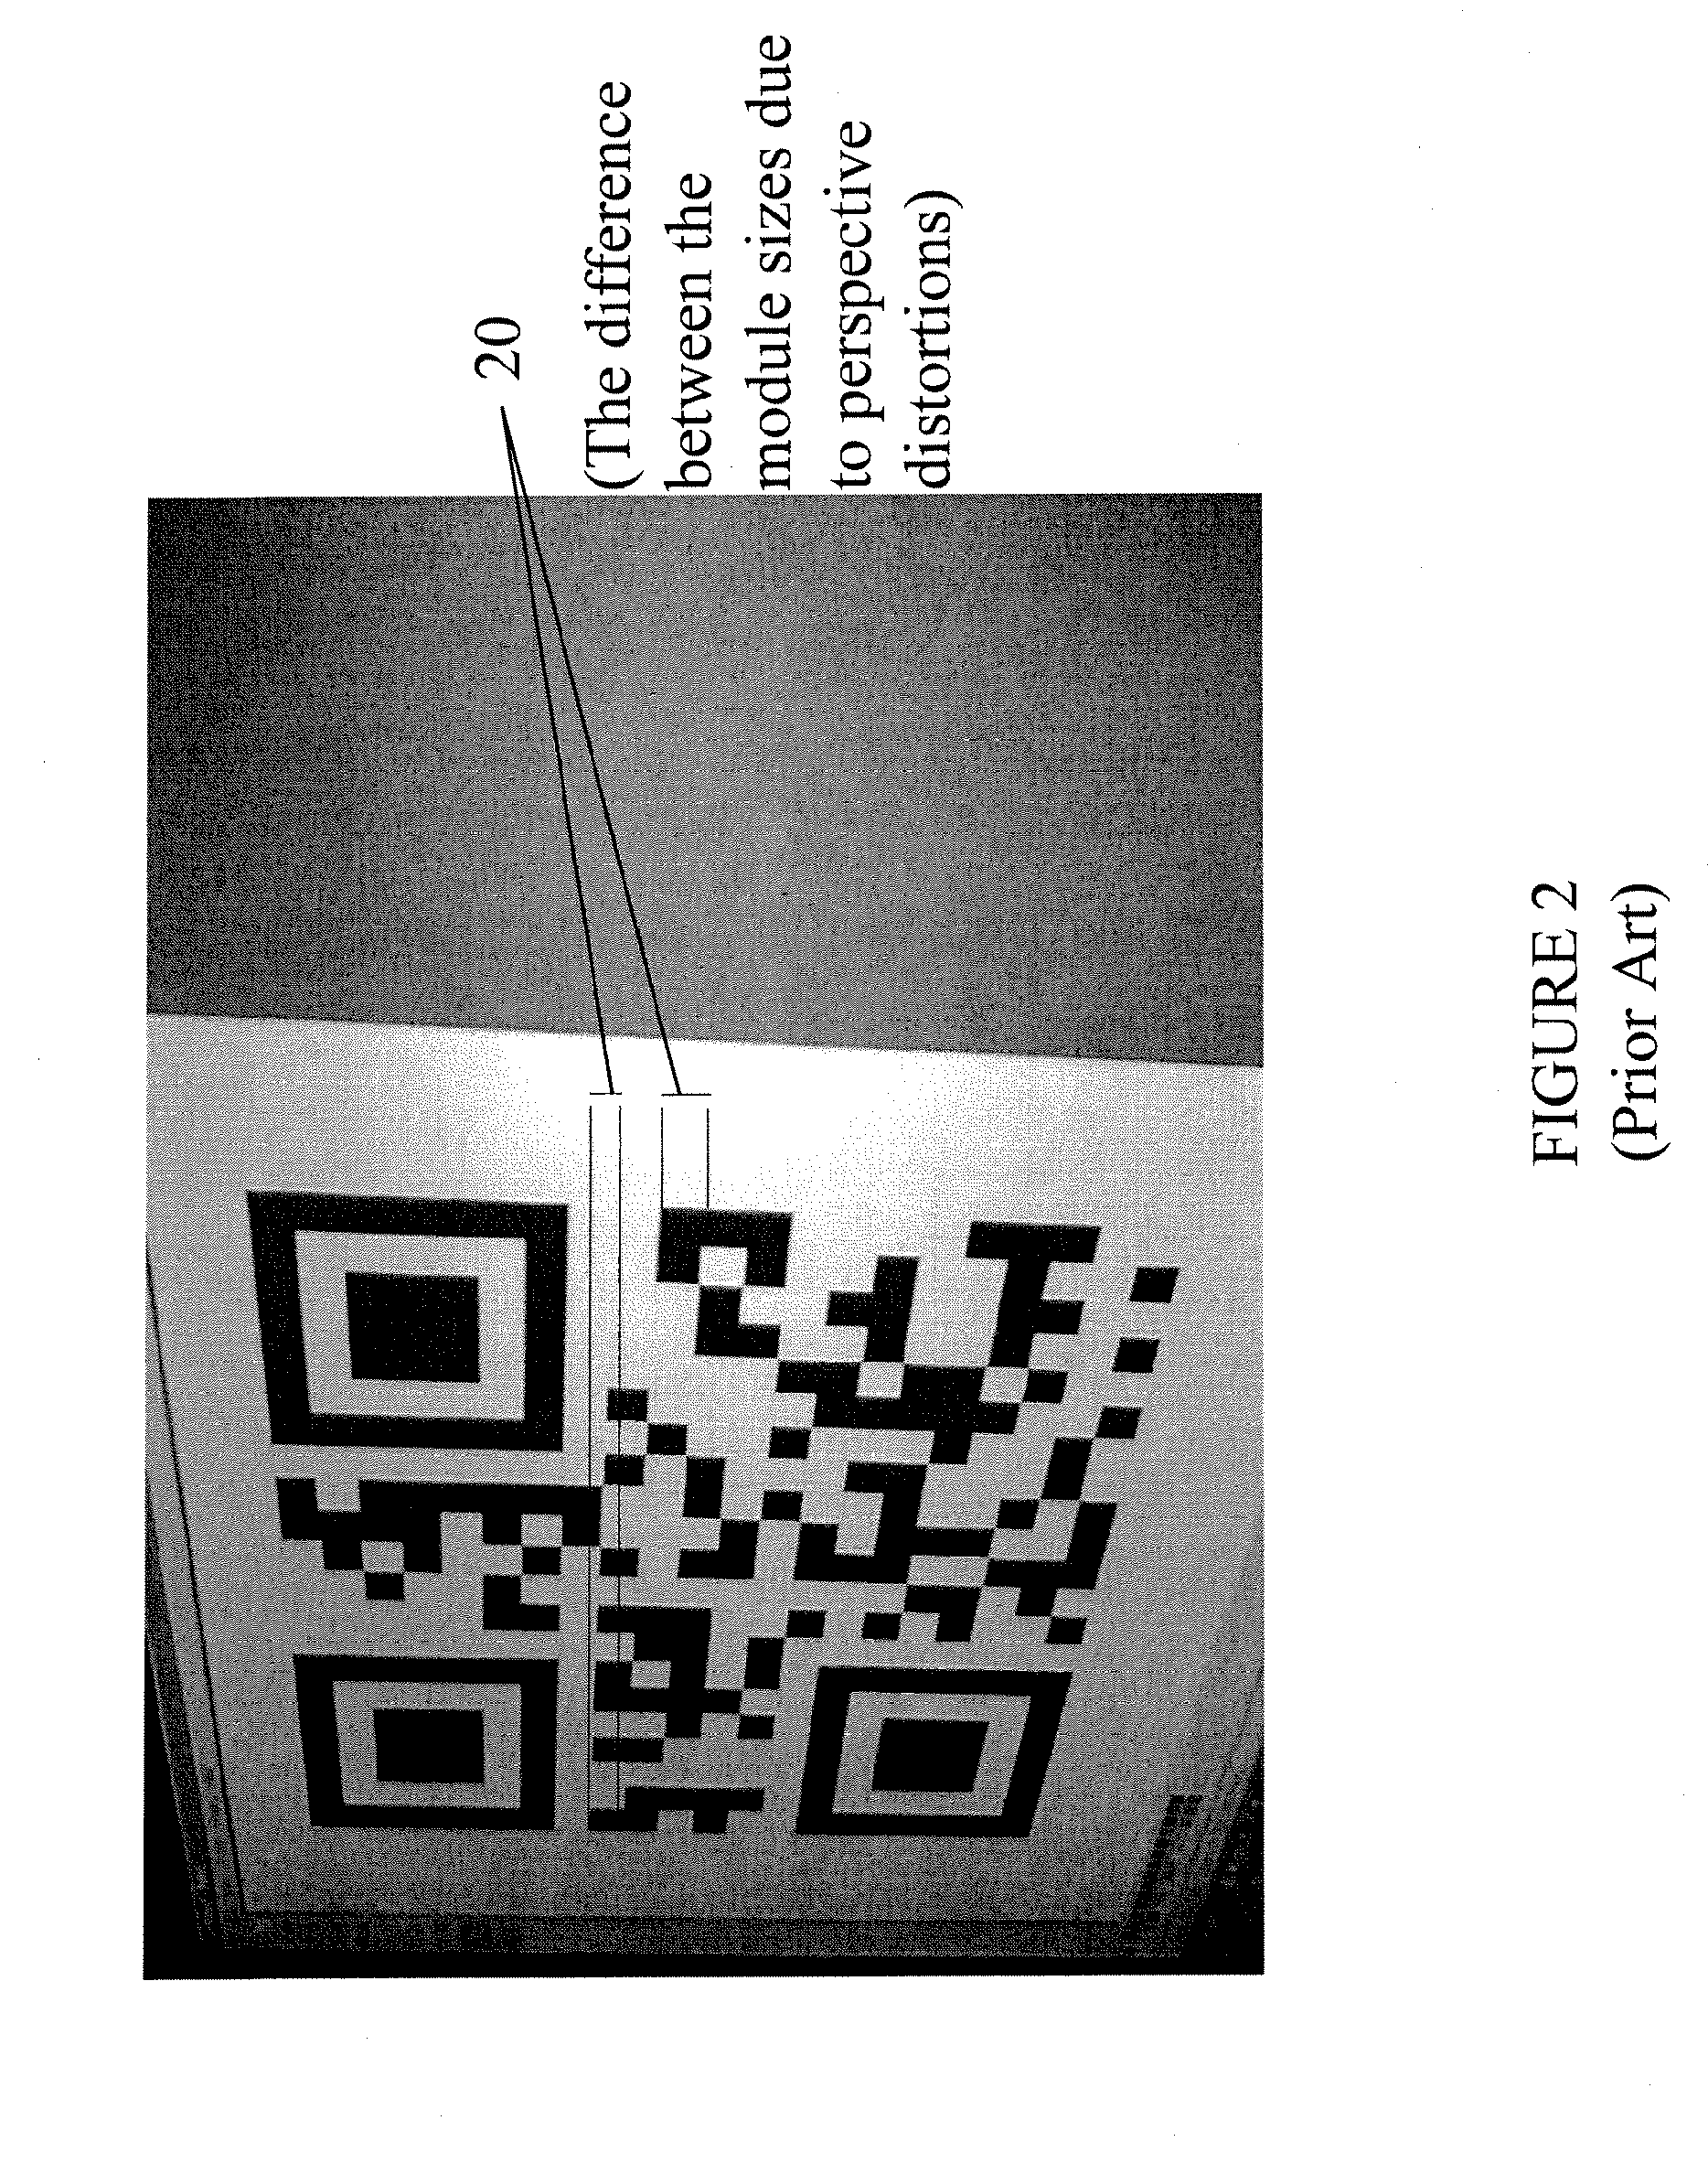 Method and system for creating and using barcodes